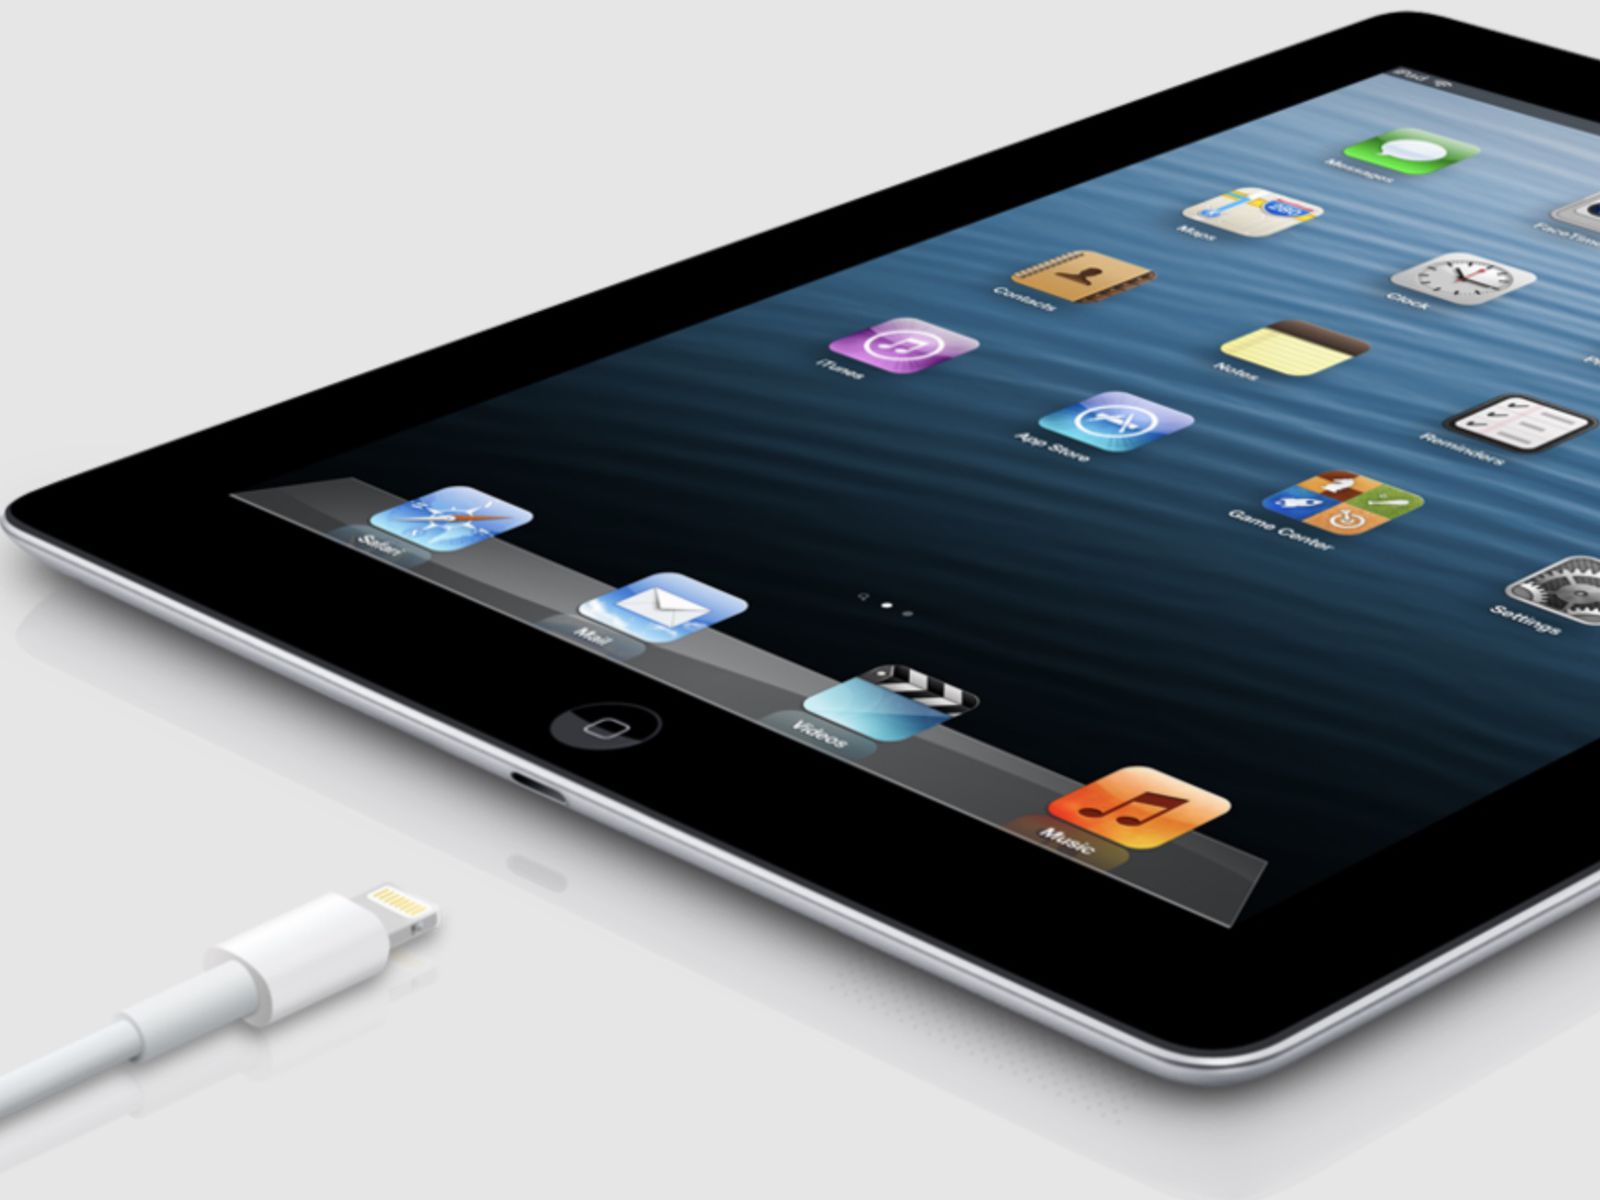 Apple declares 4th generation iPad obsolete nine years after release